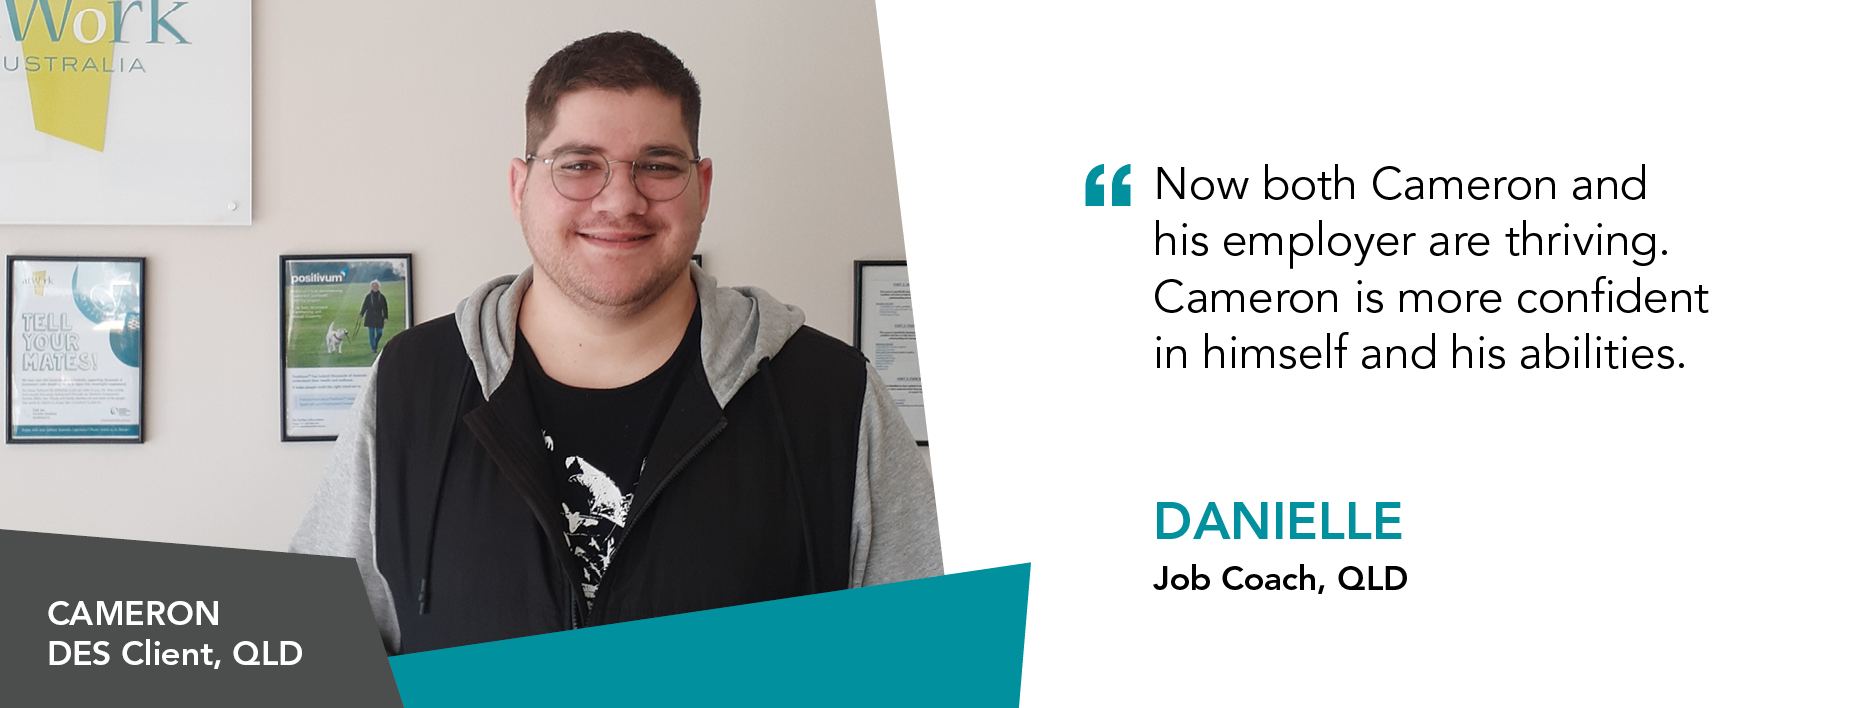 “Now both Cameron and his employer are thriving. Cameron is more confident in himself and his abilities.” - Danielle, Job Coach, Queensland